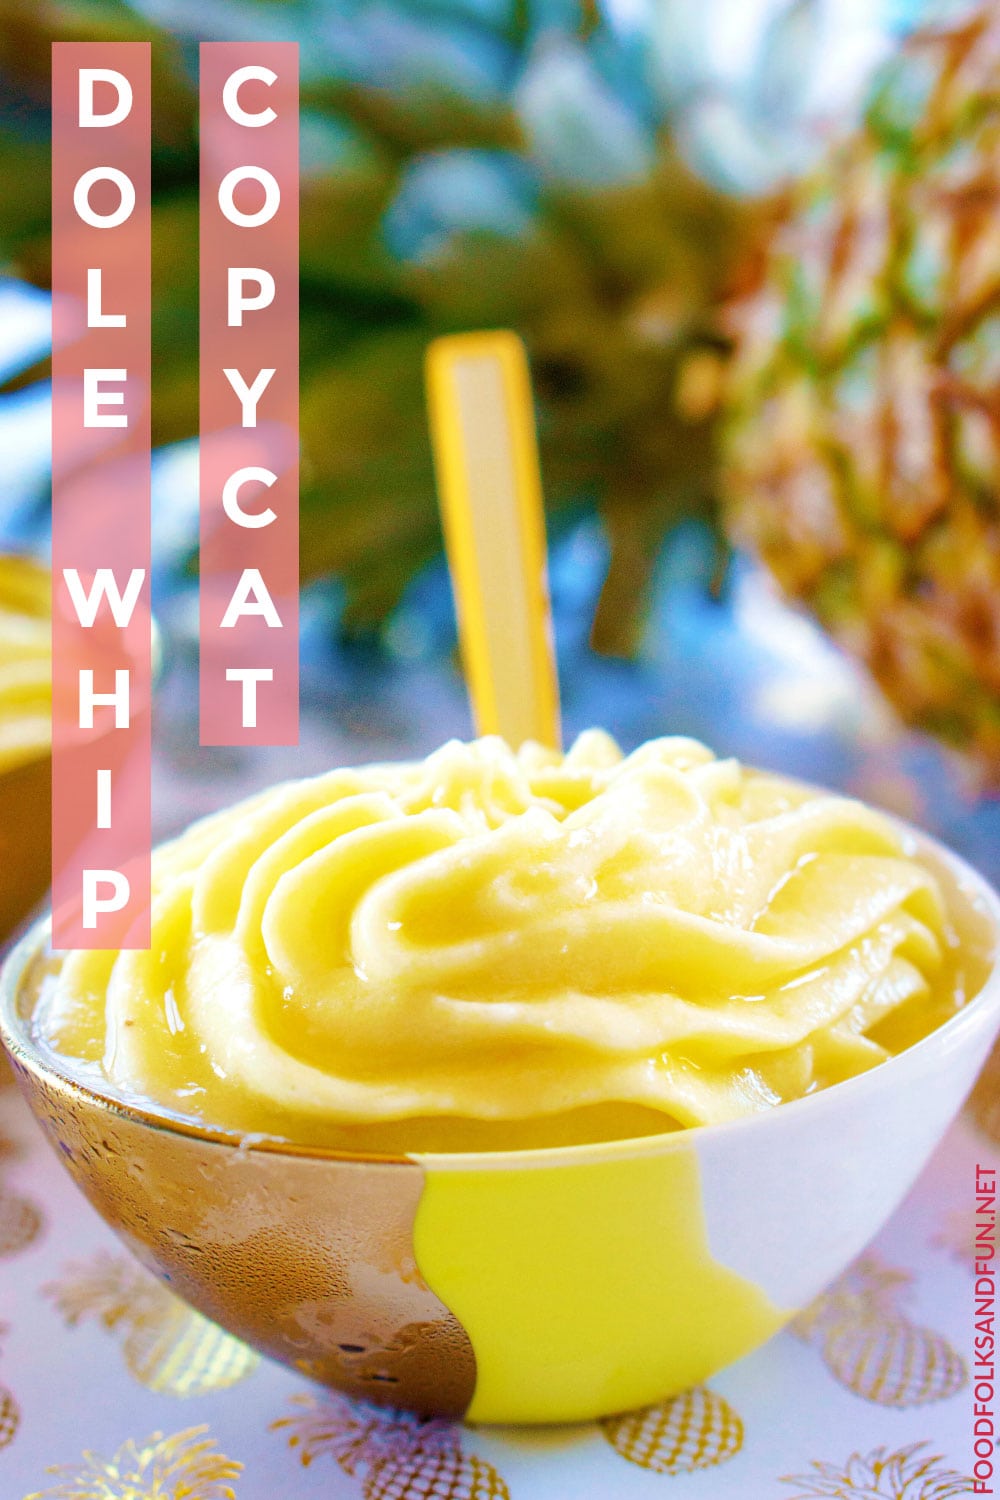 All you need are just 3 ingredients and 5 minutes to make this Dole Whip copycat recipe!